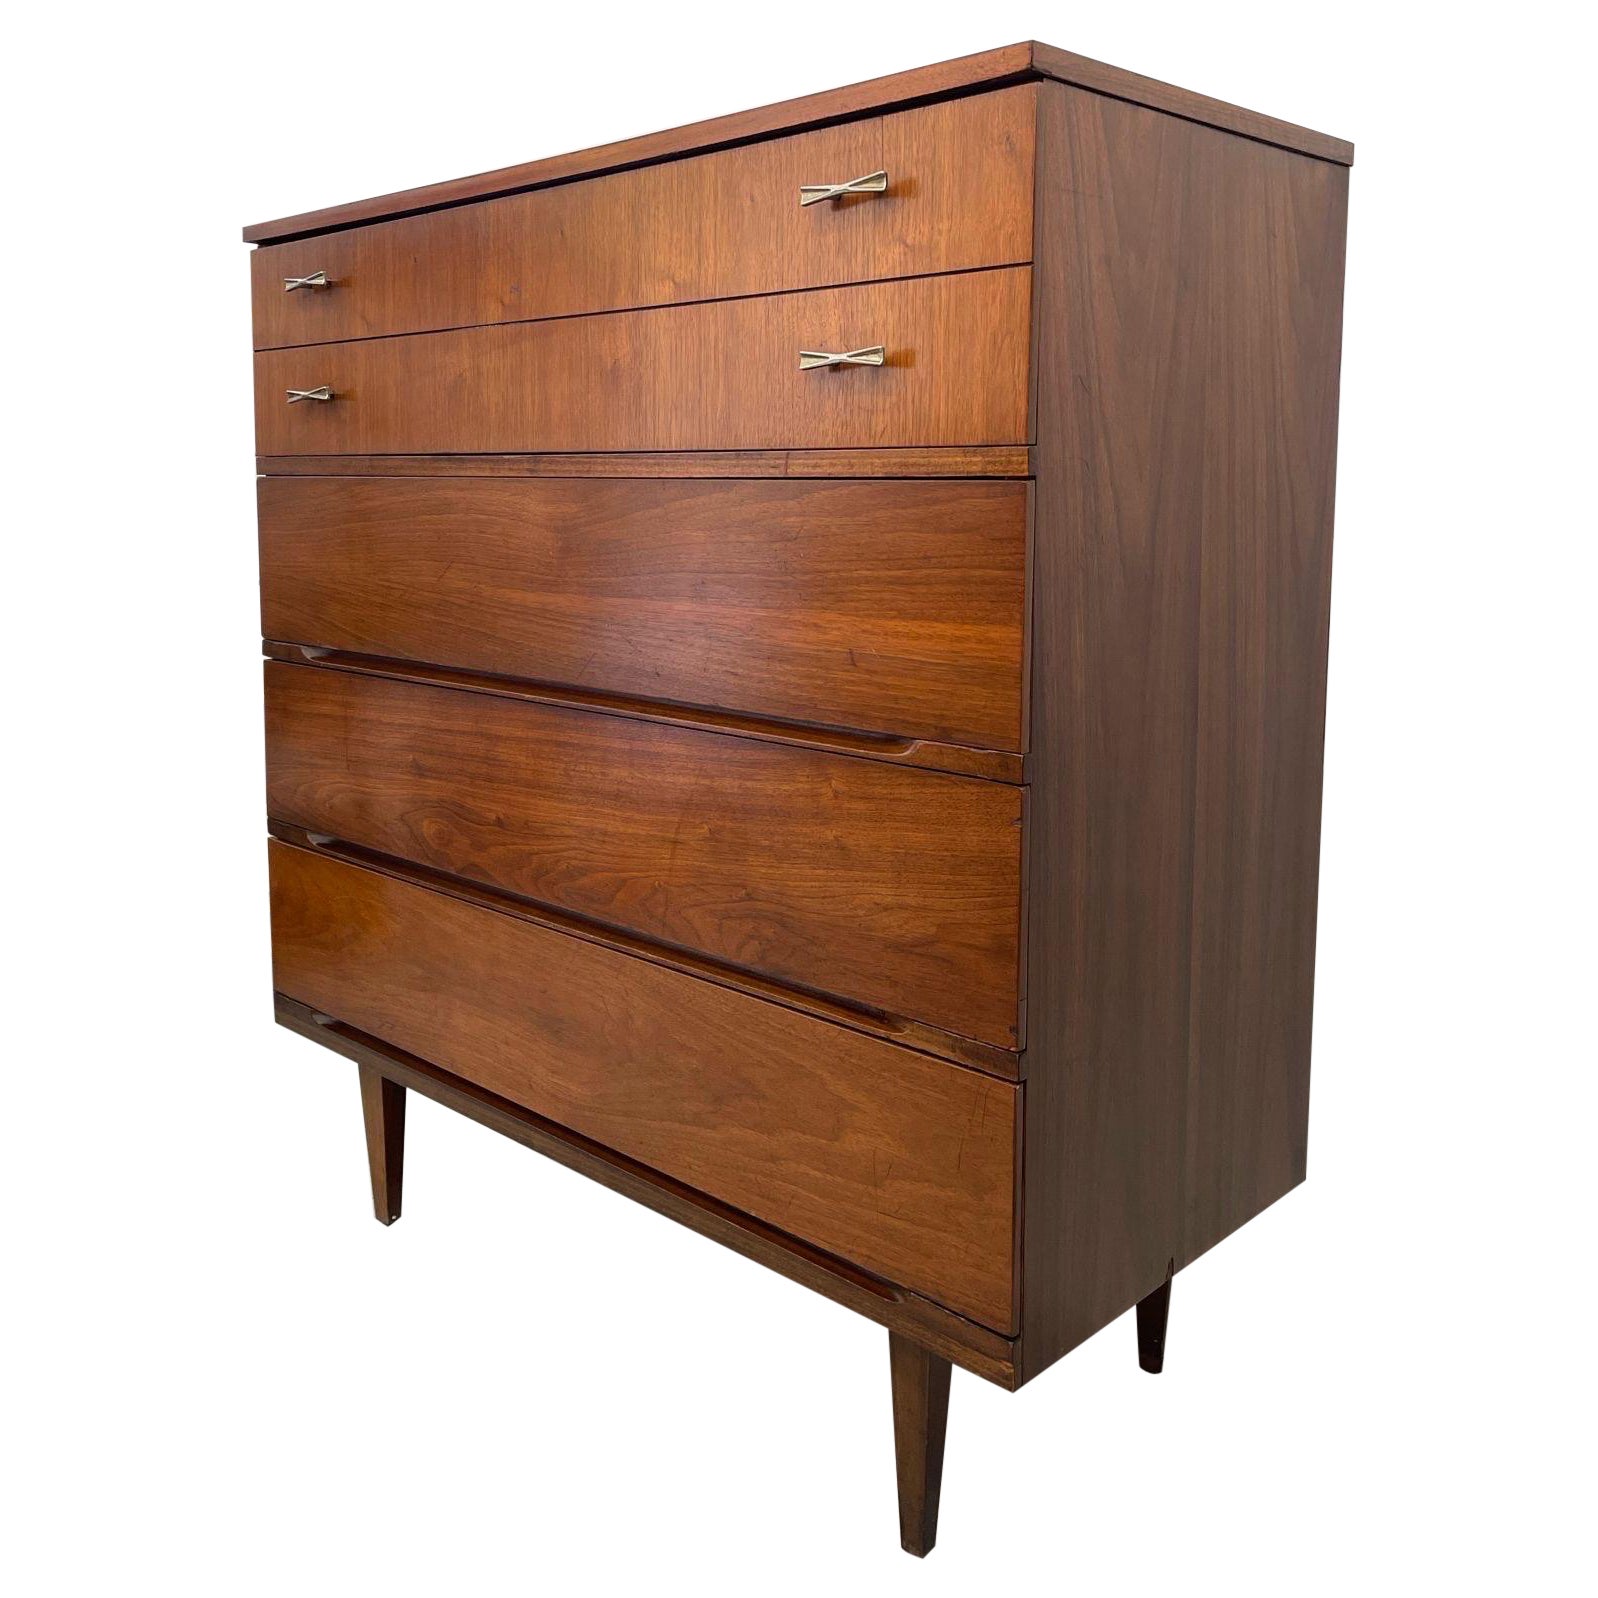 Vintage Mid Century Modern Walnut Toned Tall Dresser by Harmony House. For Sale